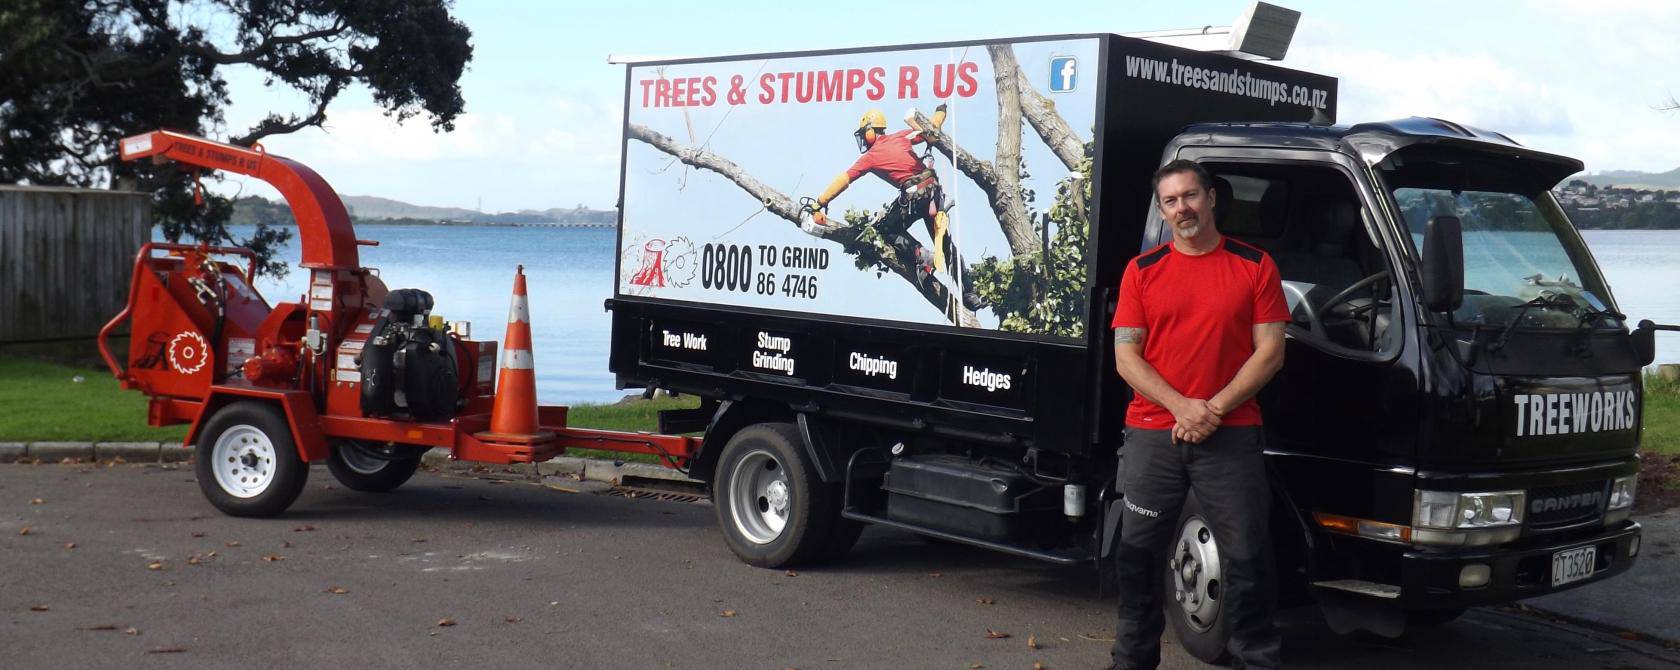 Tree Services & Stump Grinding in Palmerston North